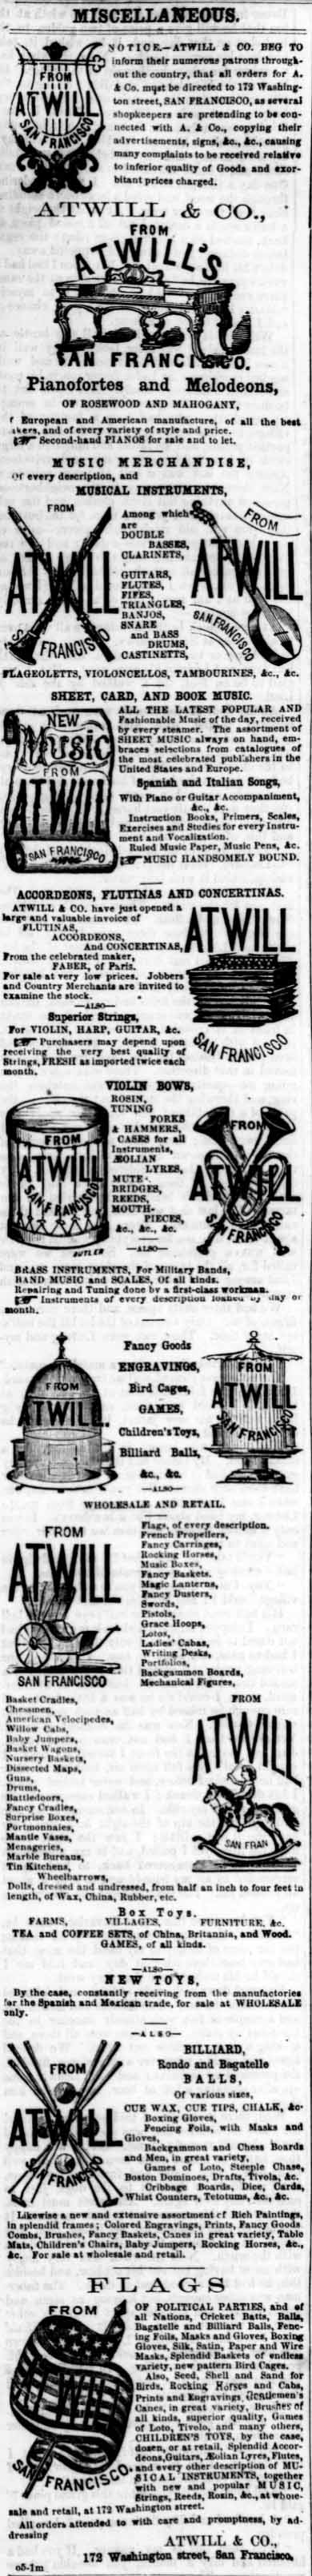 Atwill & Co. Advertisement from The Wide West November 1856.